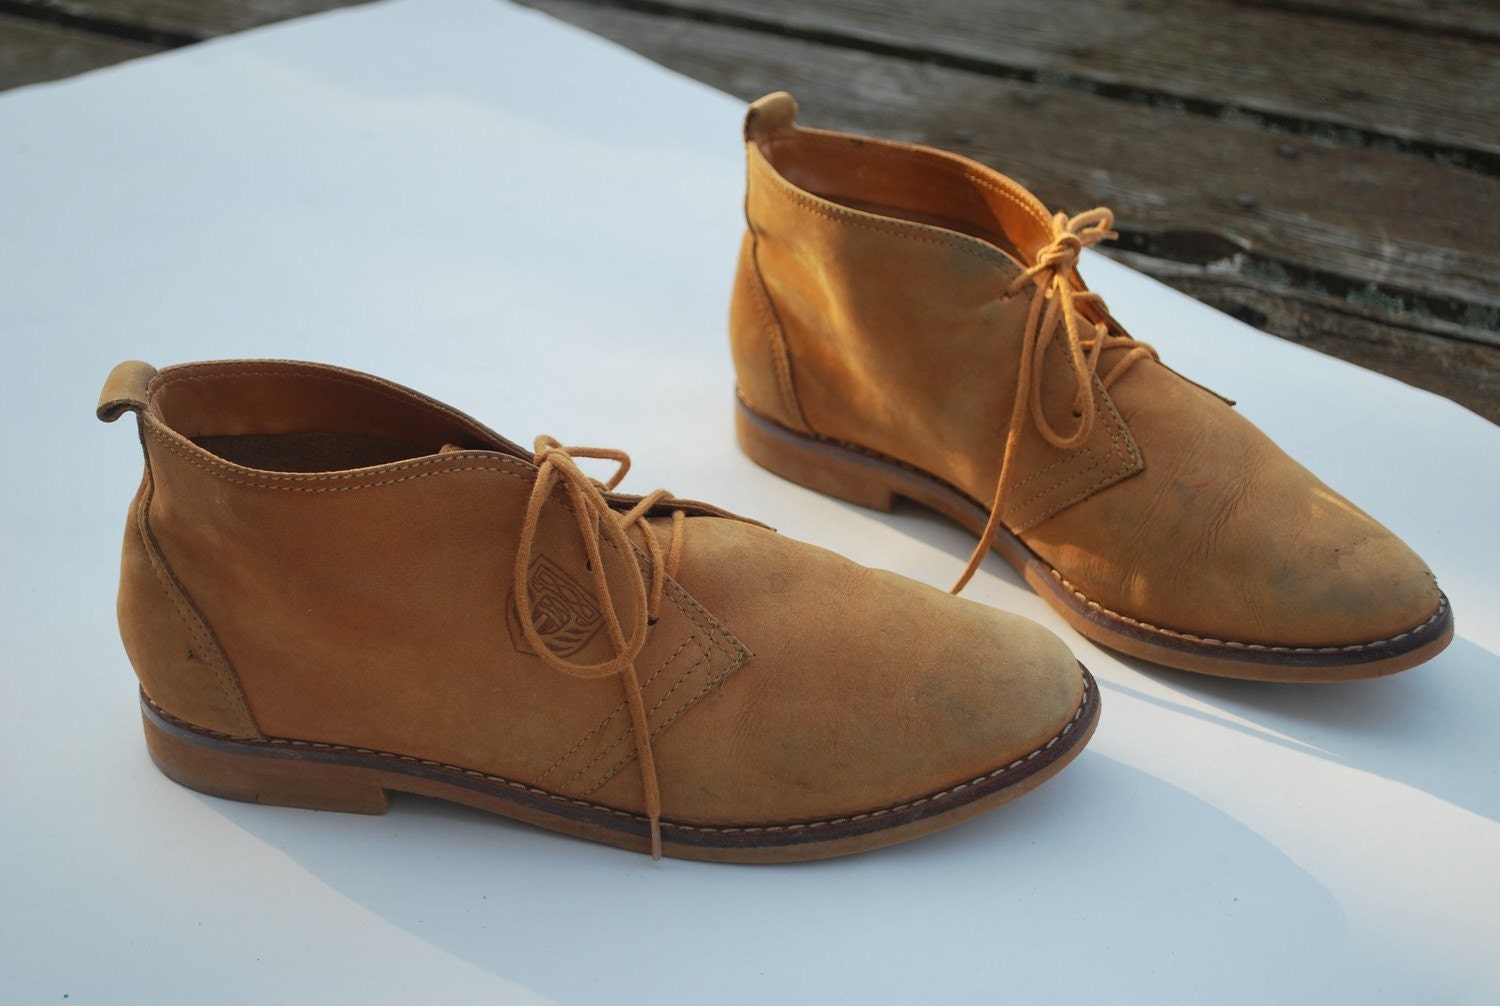 Camel Sueded leather chukka boots .vintage ankle boots